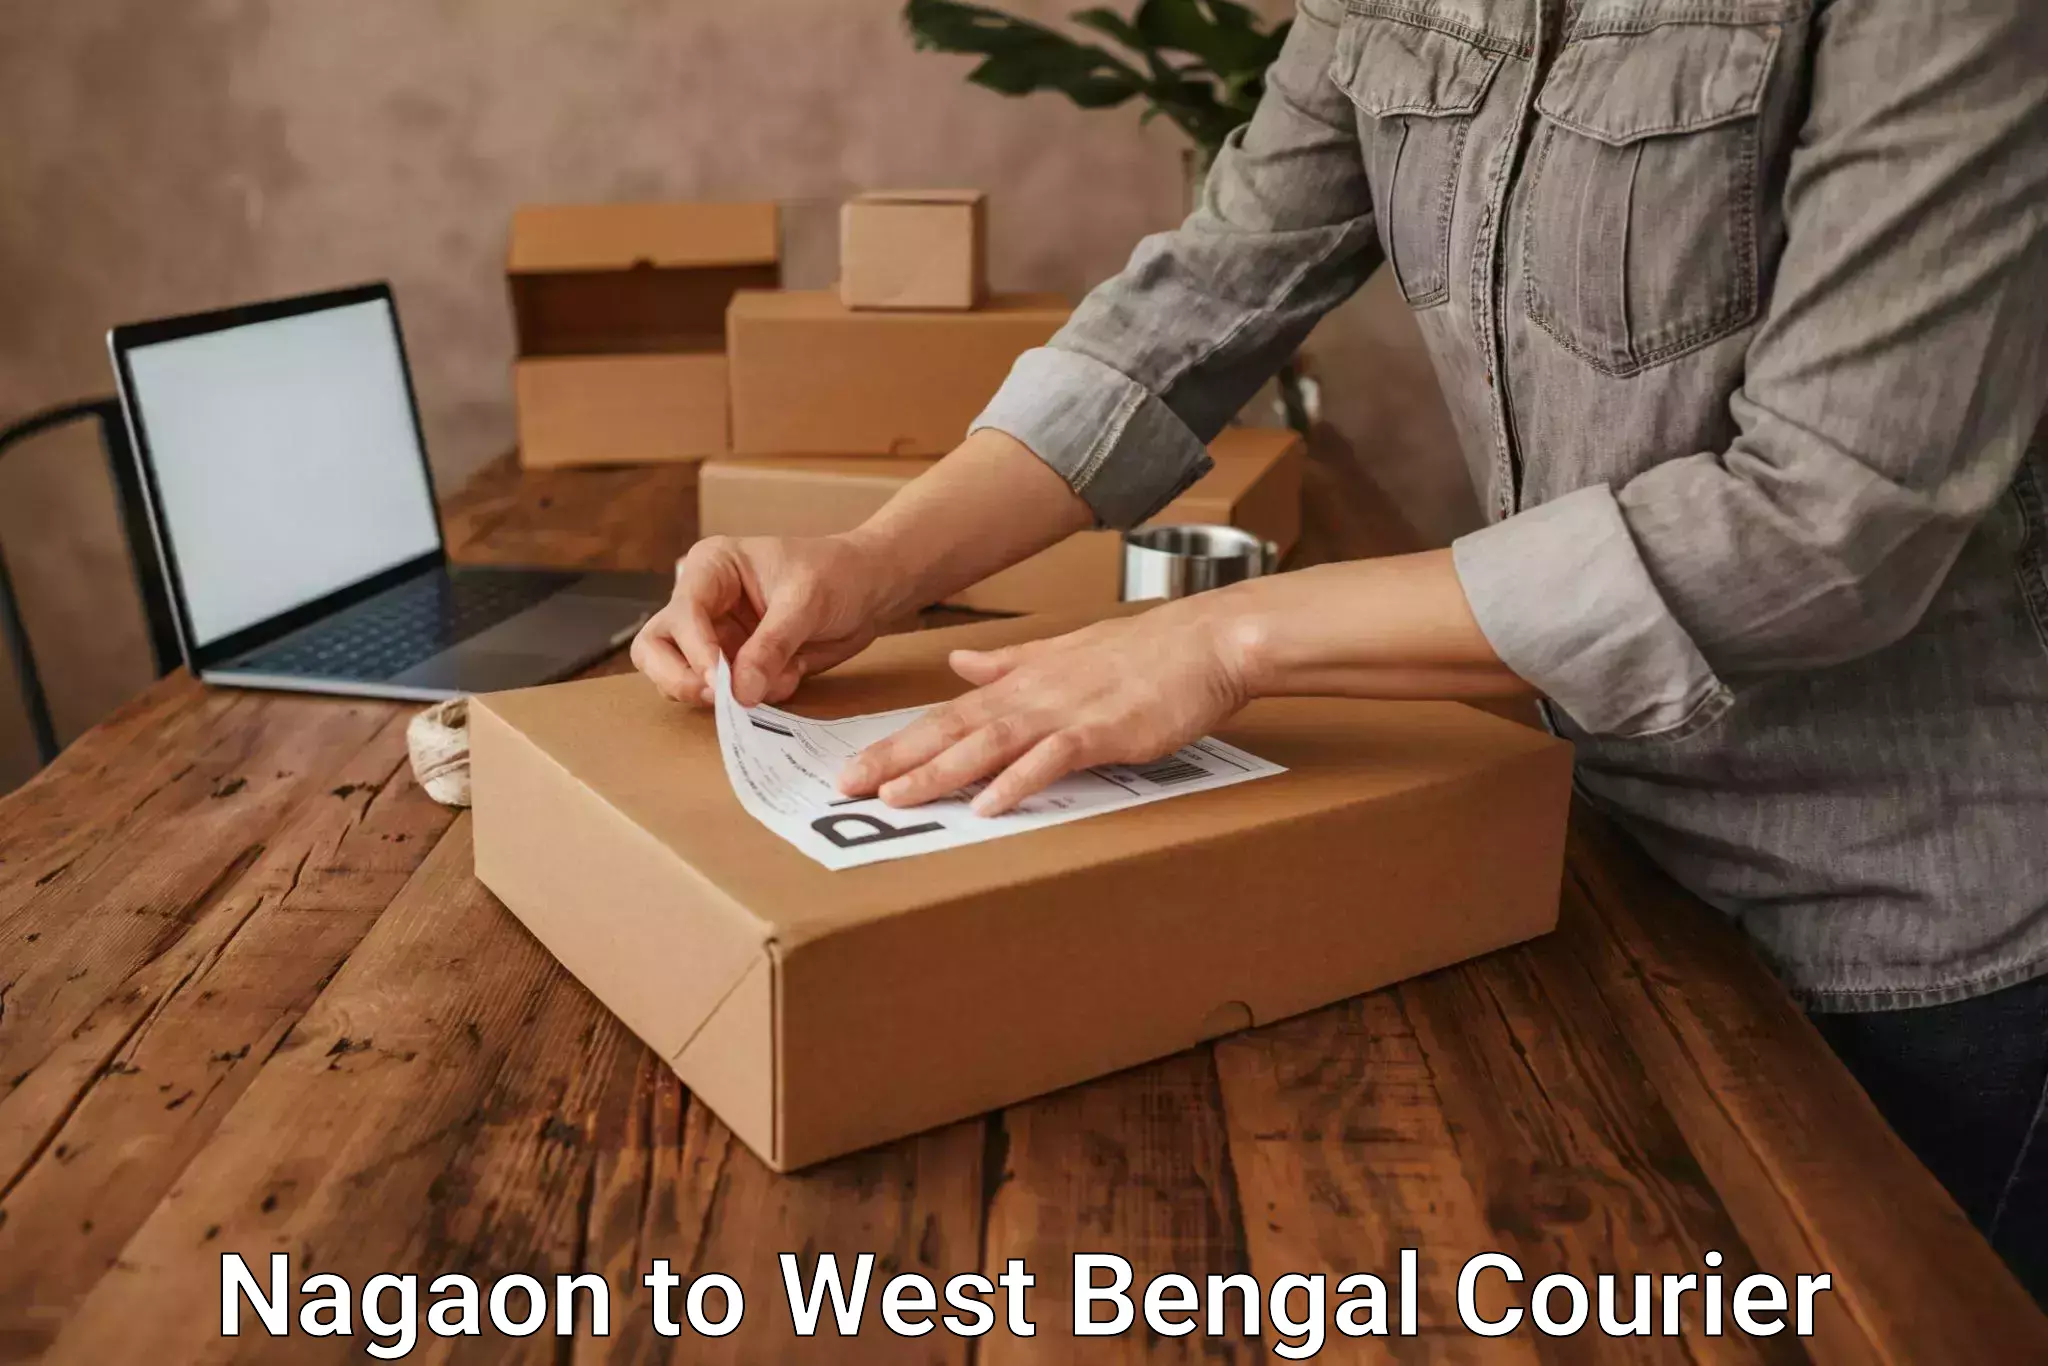 Dynamic courier operations in Nagaon to The University of Burdwan Barddhaman